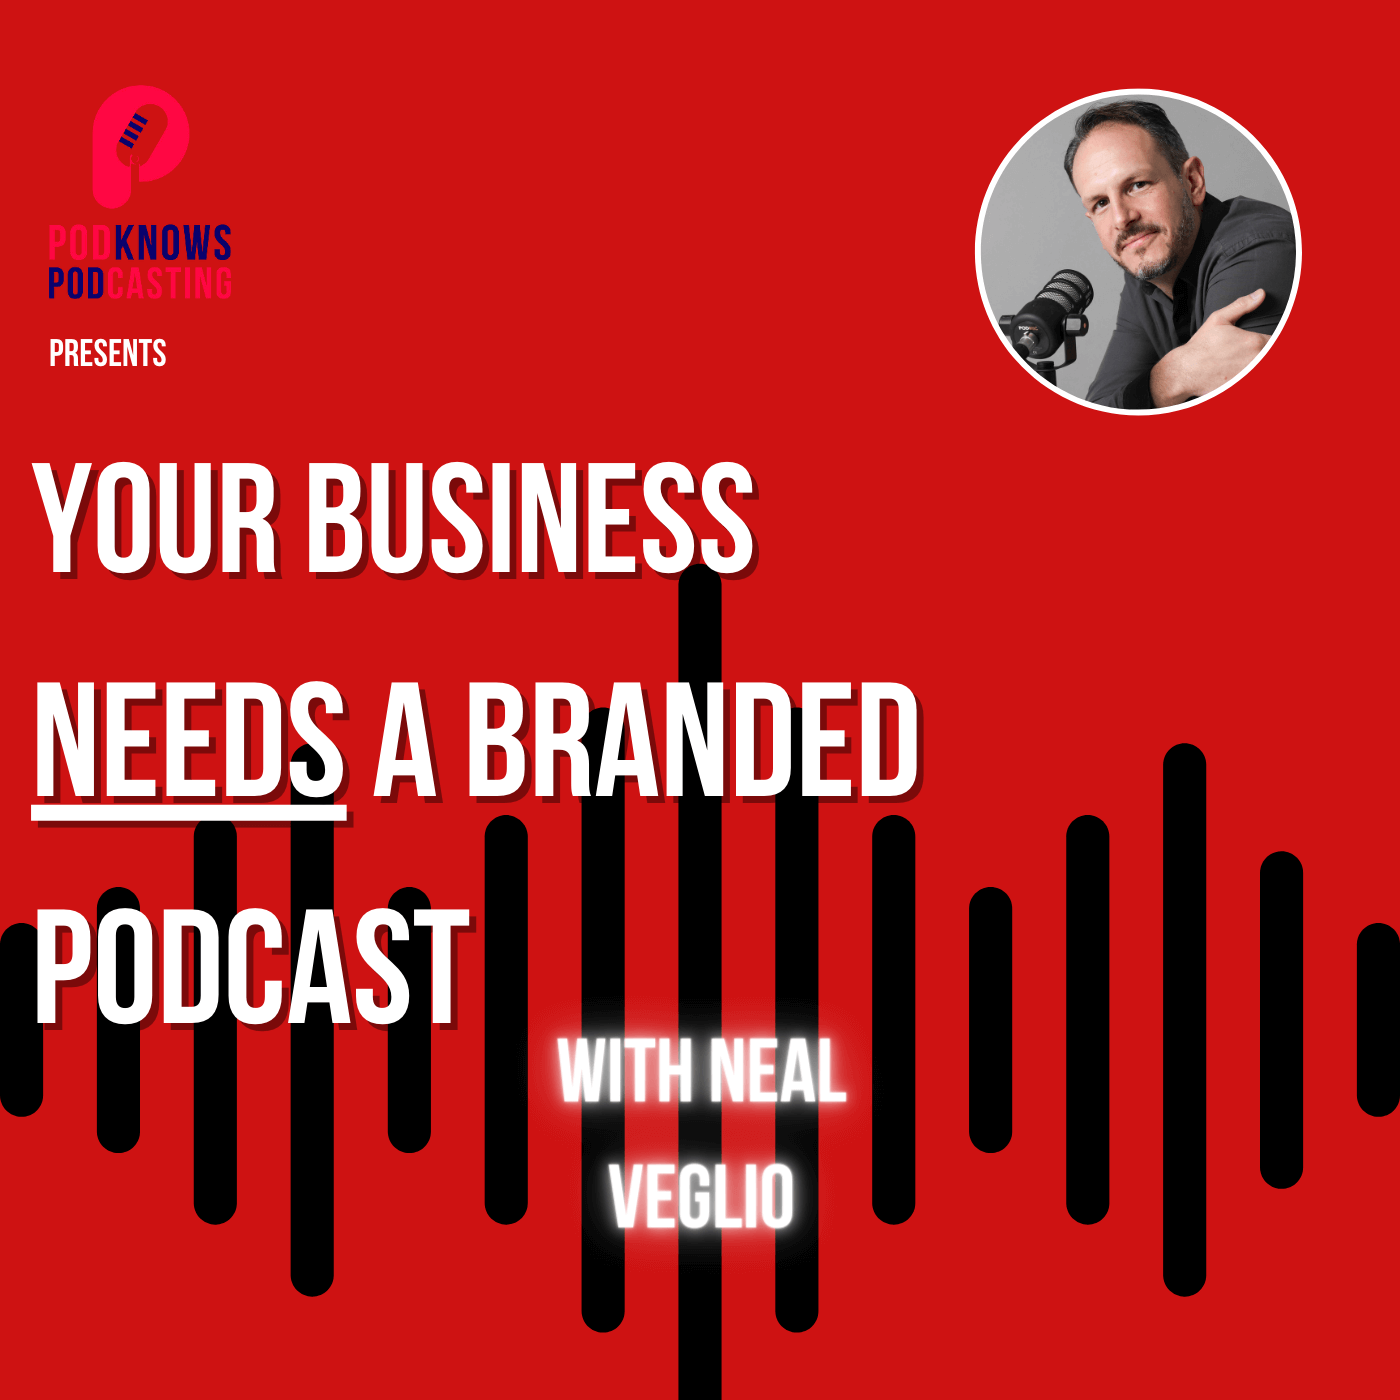 Your Business Needs A Branded Podcast: podcasting for lead generation, brand growth and sales